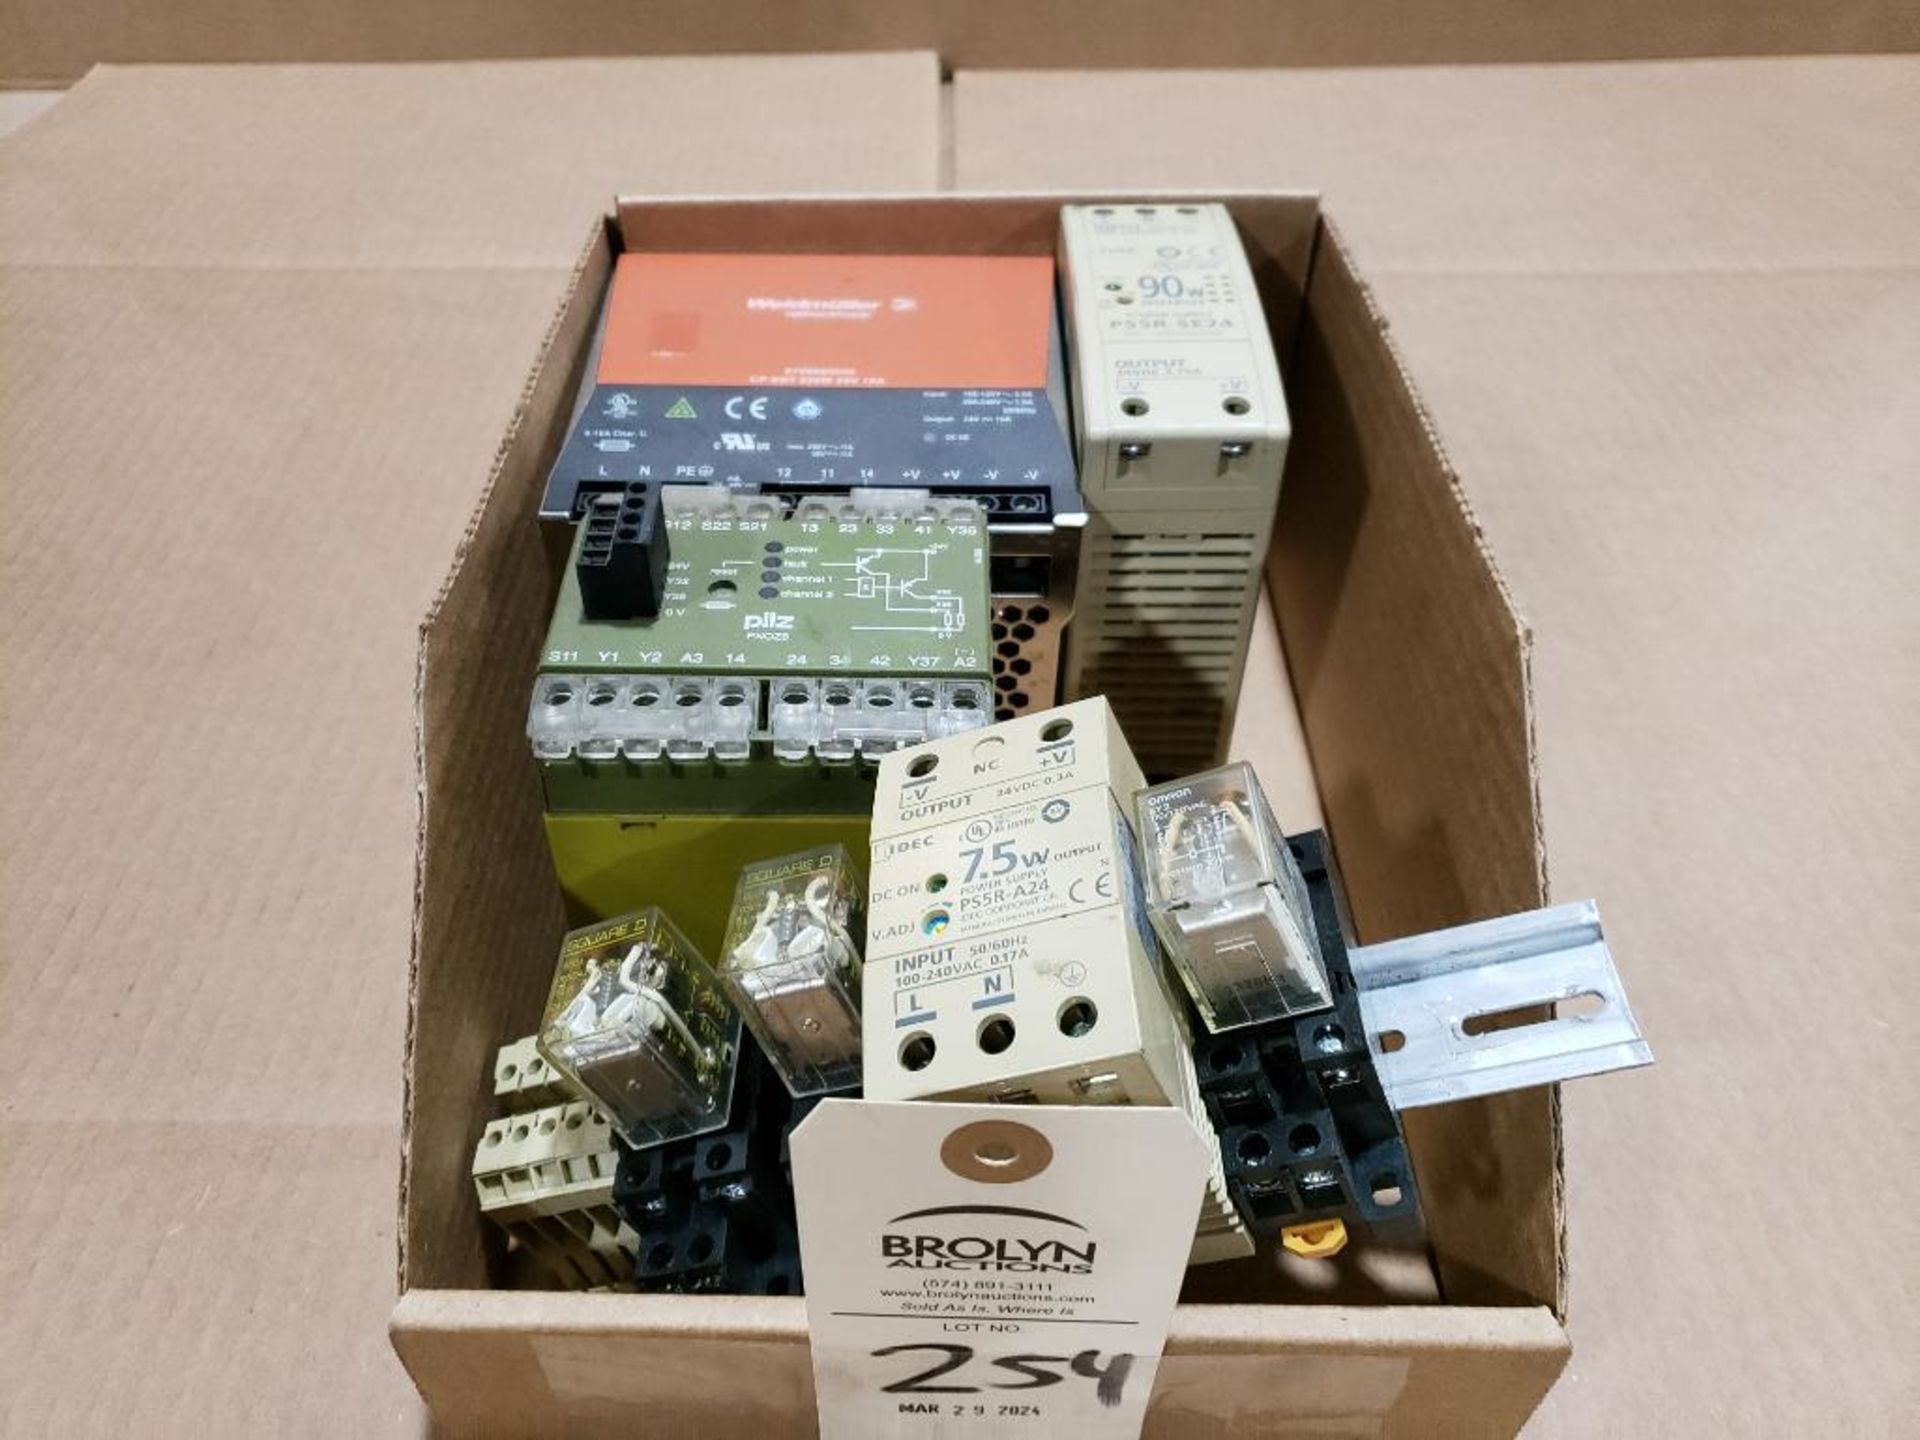 Assorted power supplies and electrical.